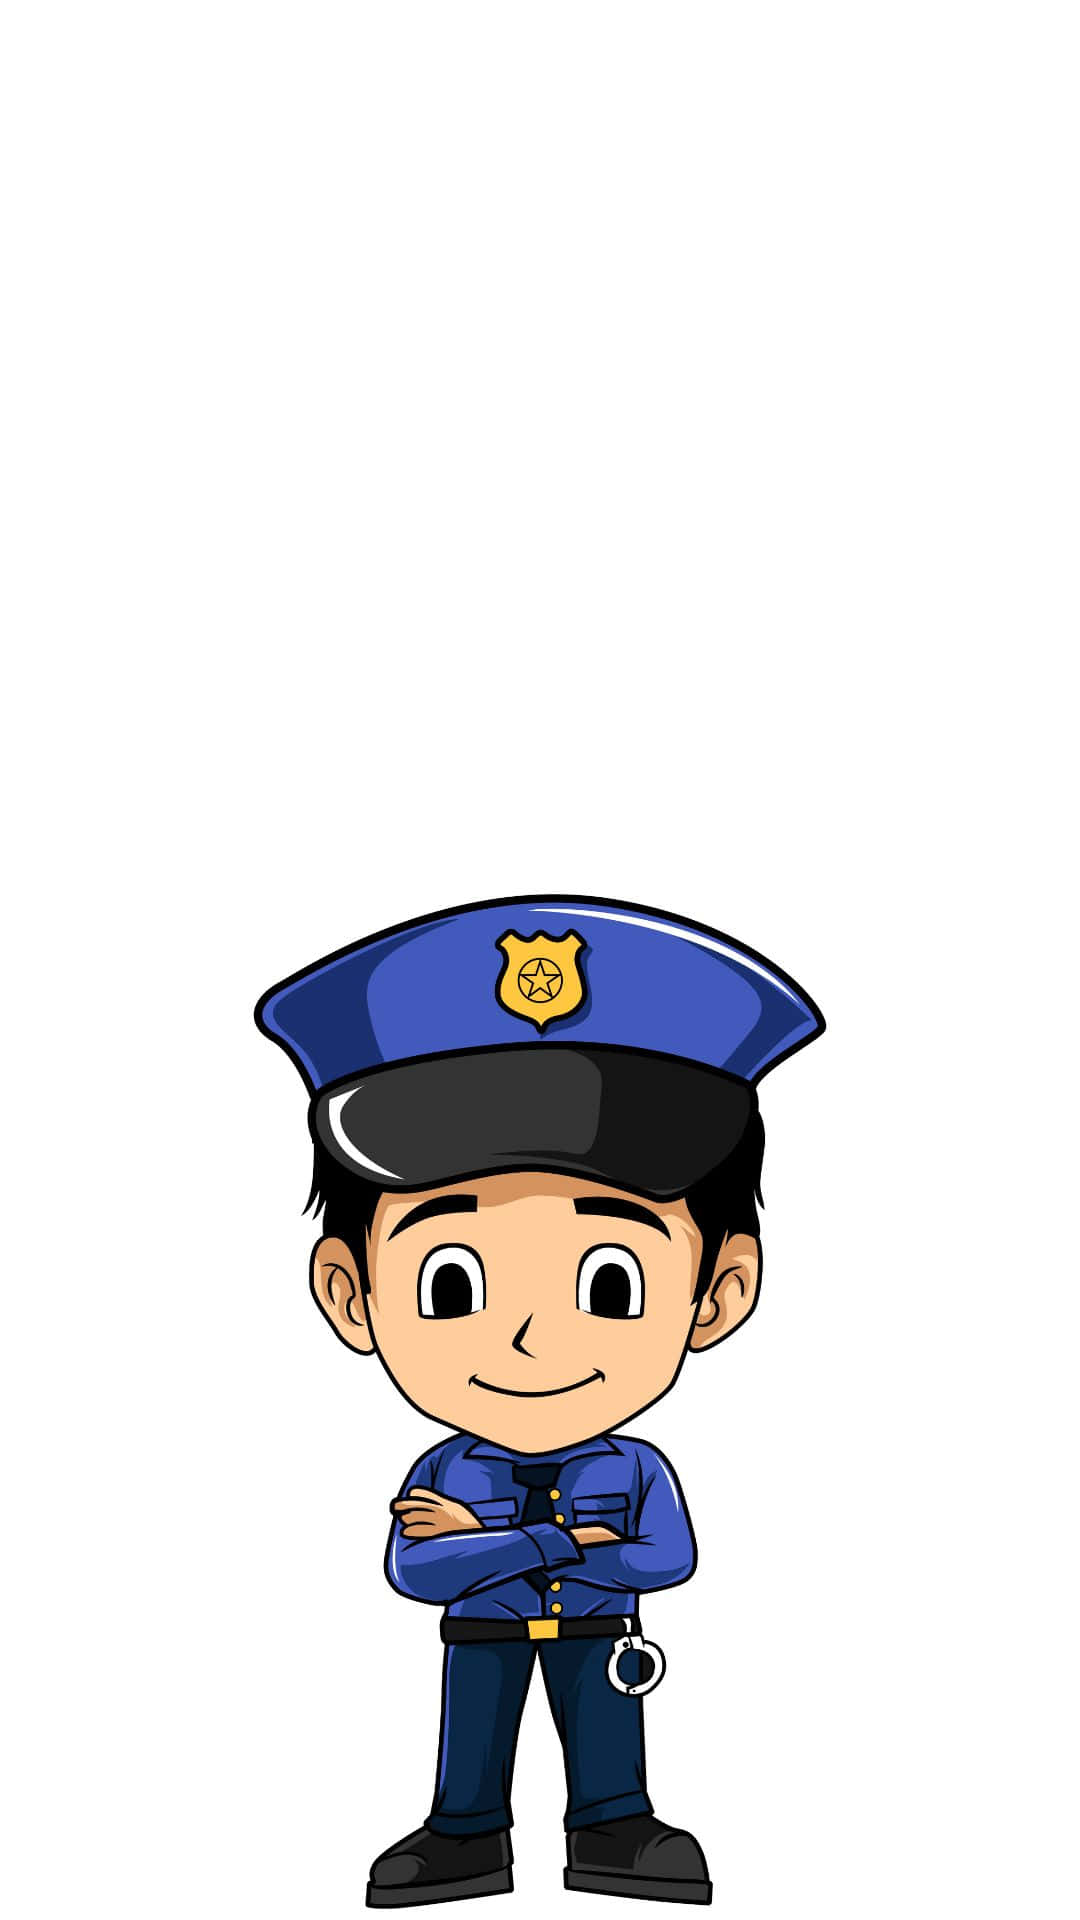 Cute Cop In Uniform With Arms Crossed